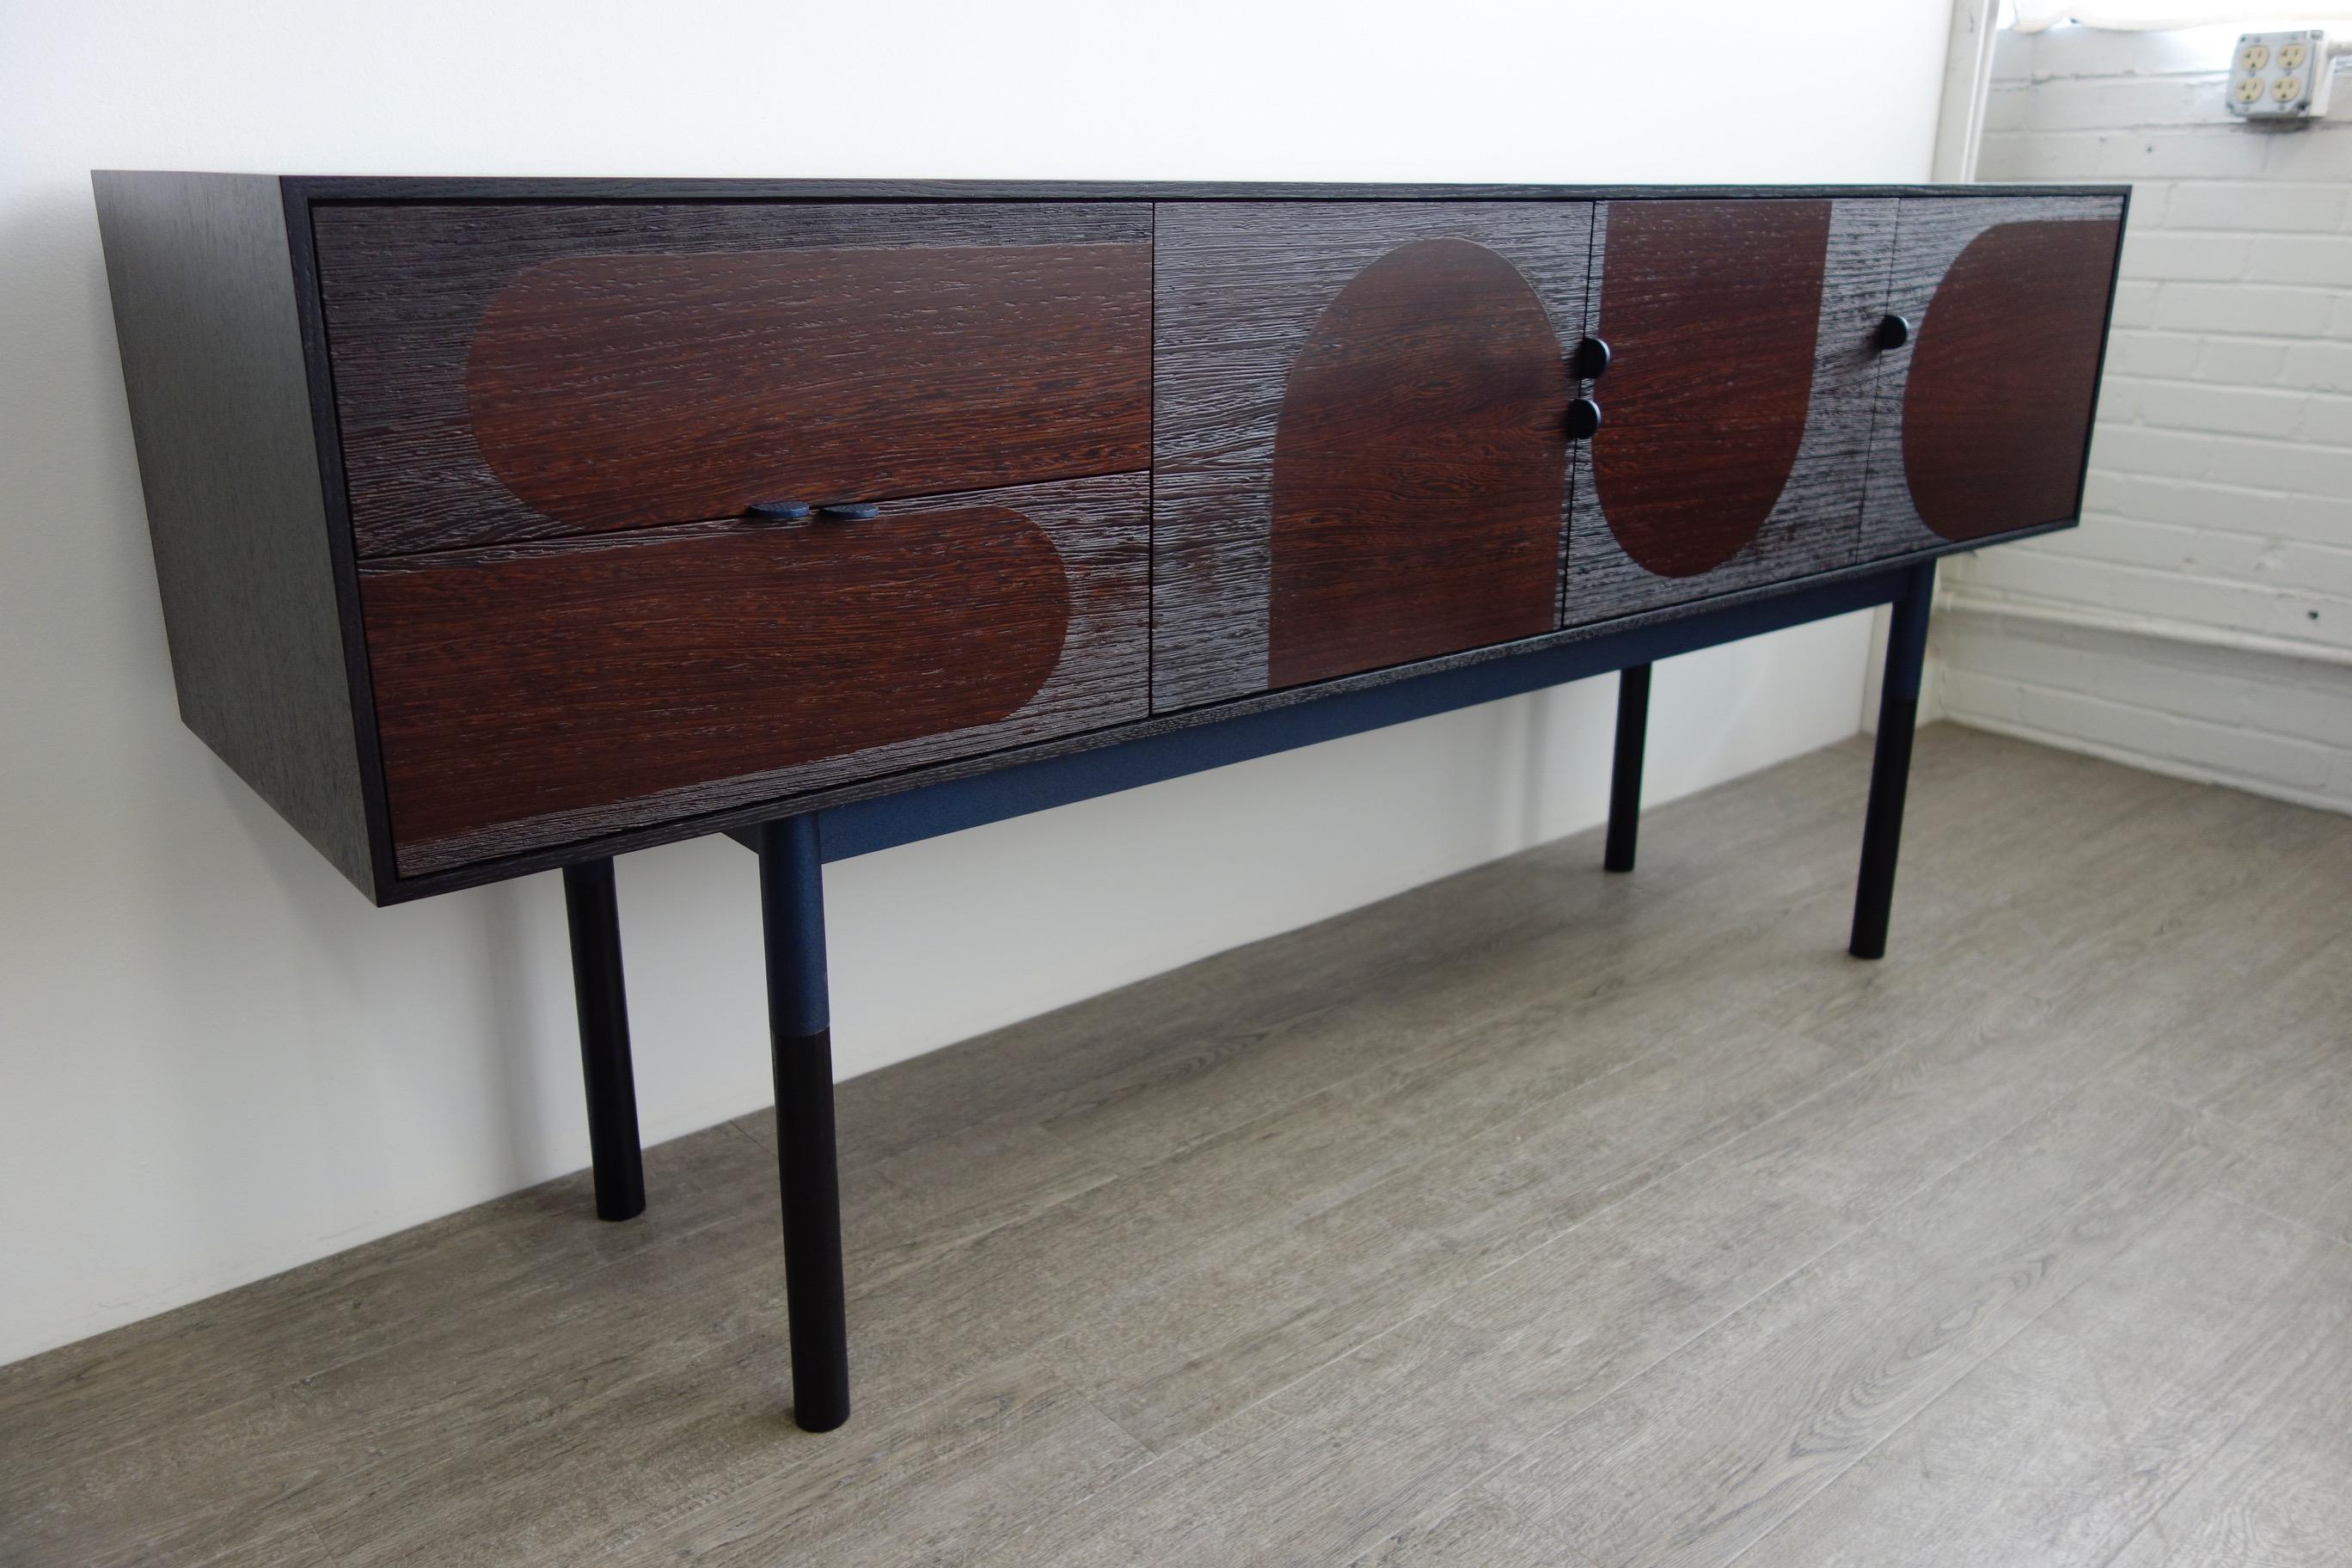 Sleek sideboard made of wengé, ebonized rift-sawn oak and steel. The doors are constructed of hand-sliced African wengé veneer and then media blasted to expose graphic arch patterns. The effect is stunning but subtle as the coarse texture reflects